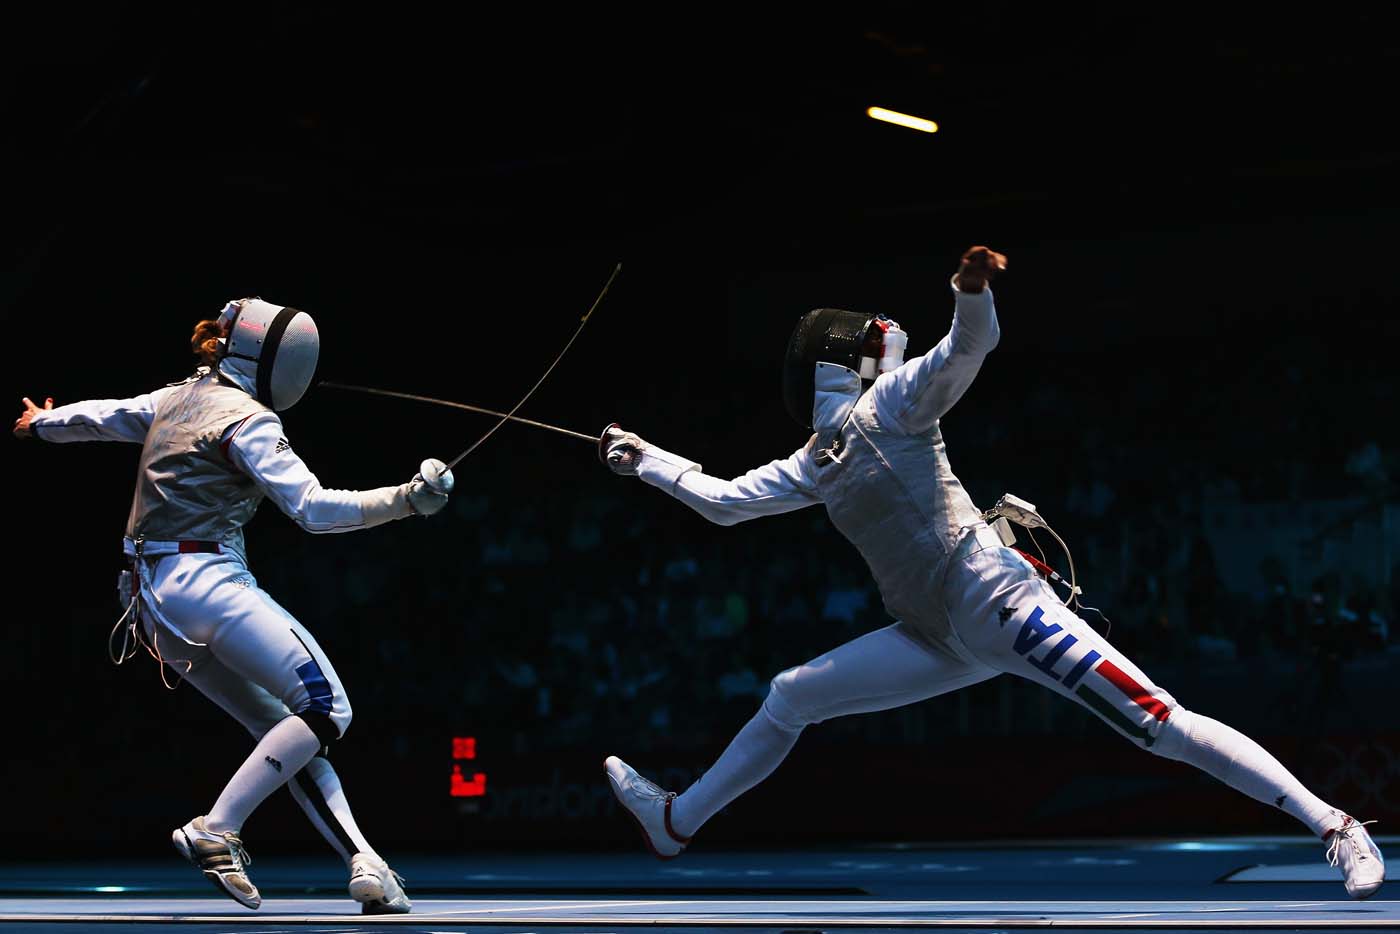 Download Latest HD Wallpaper of, Sports, Fencing